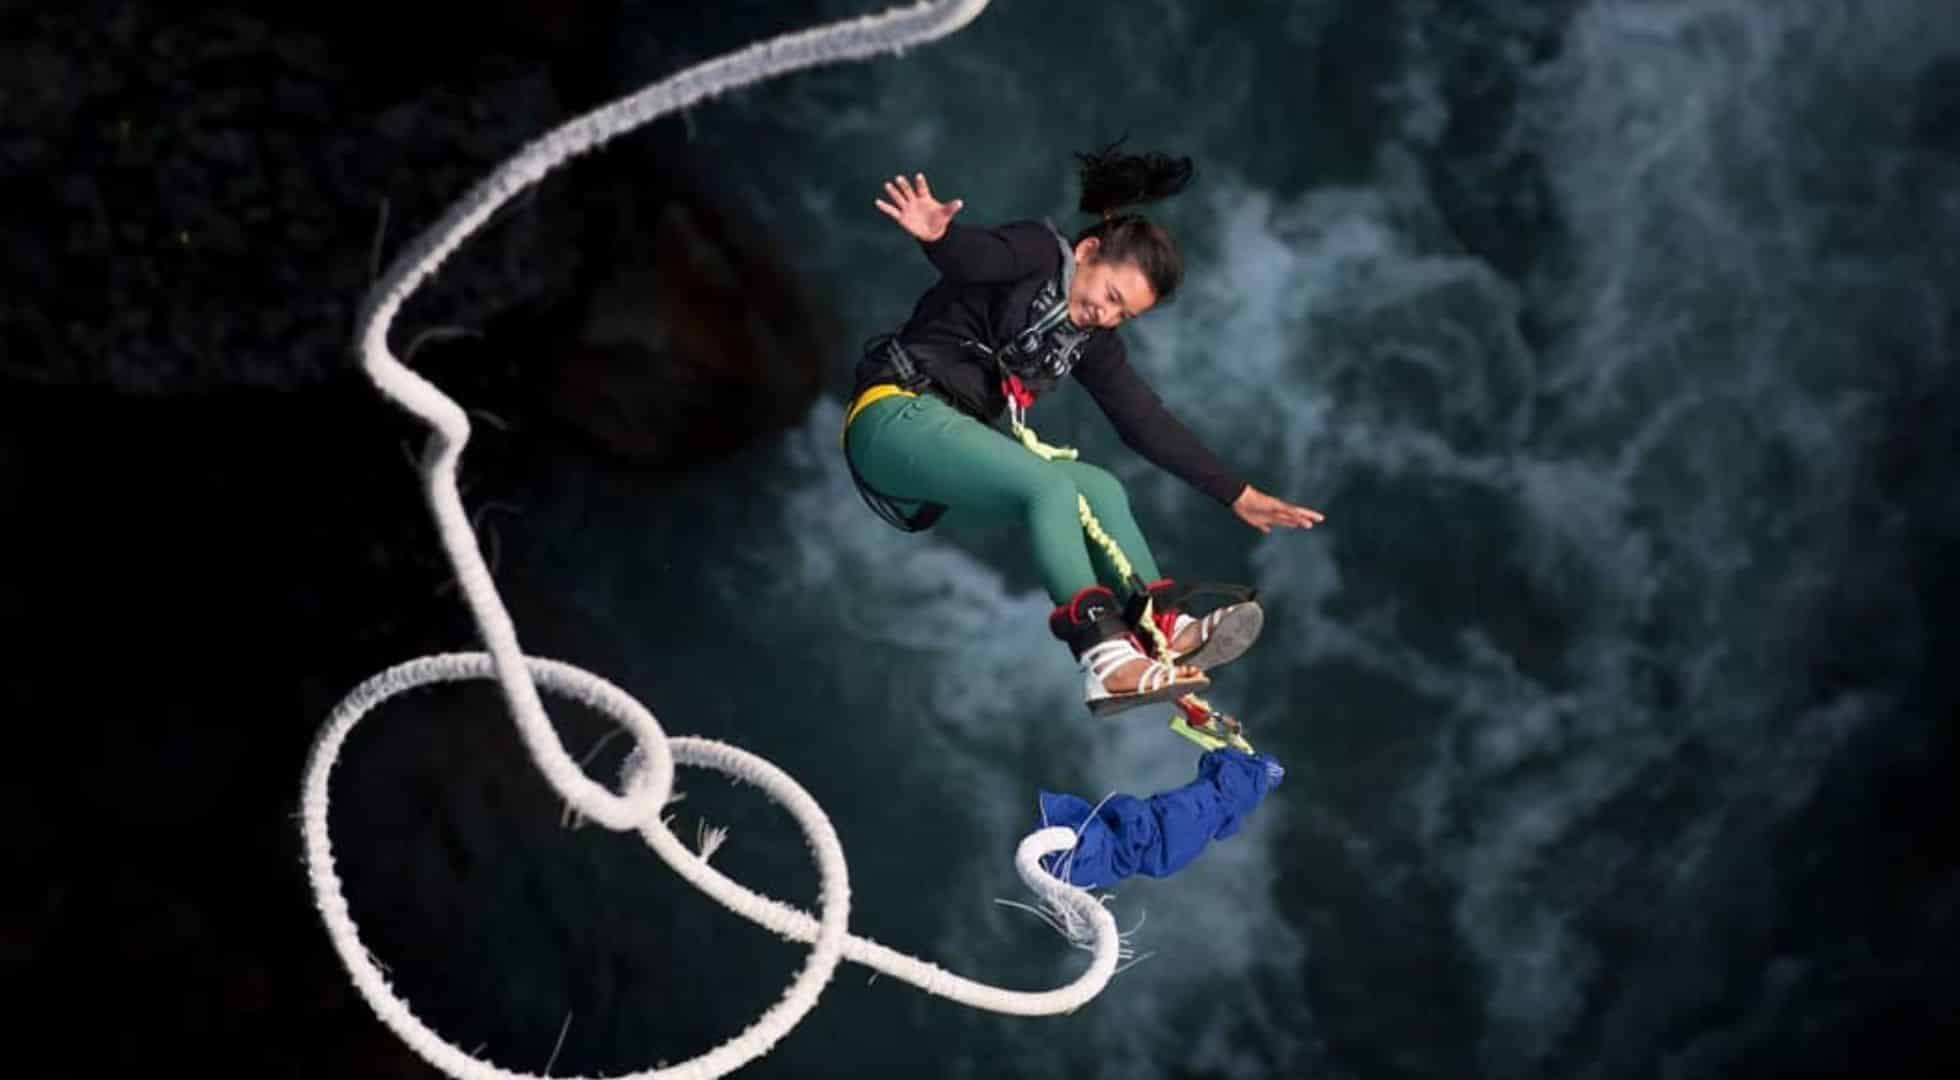 The World's Second Highest Bungee Jump in Nepal